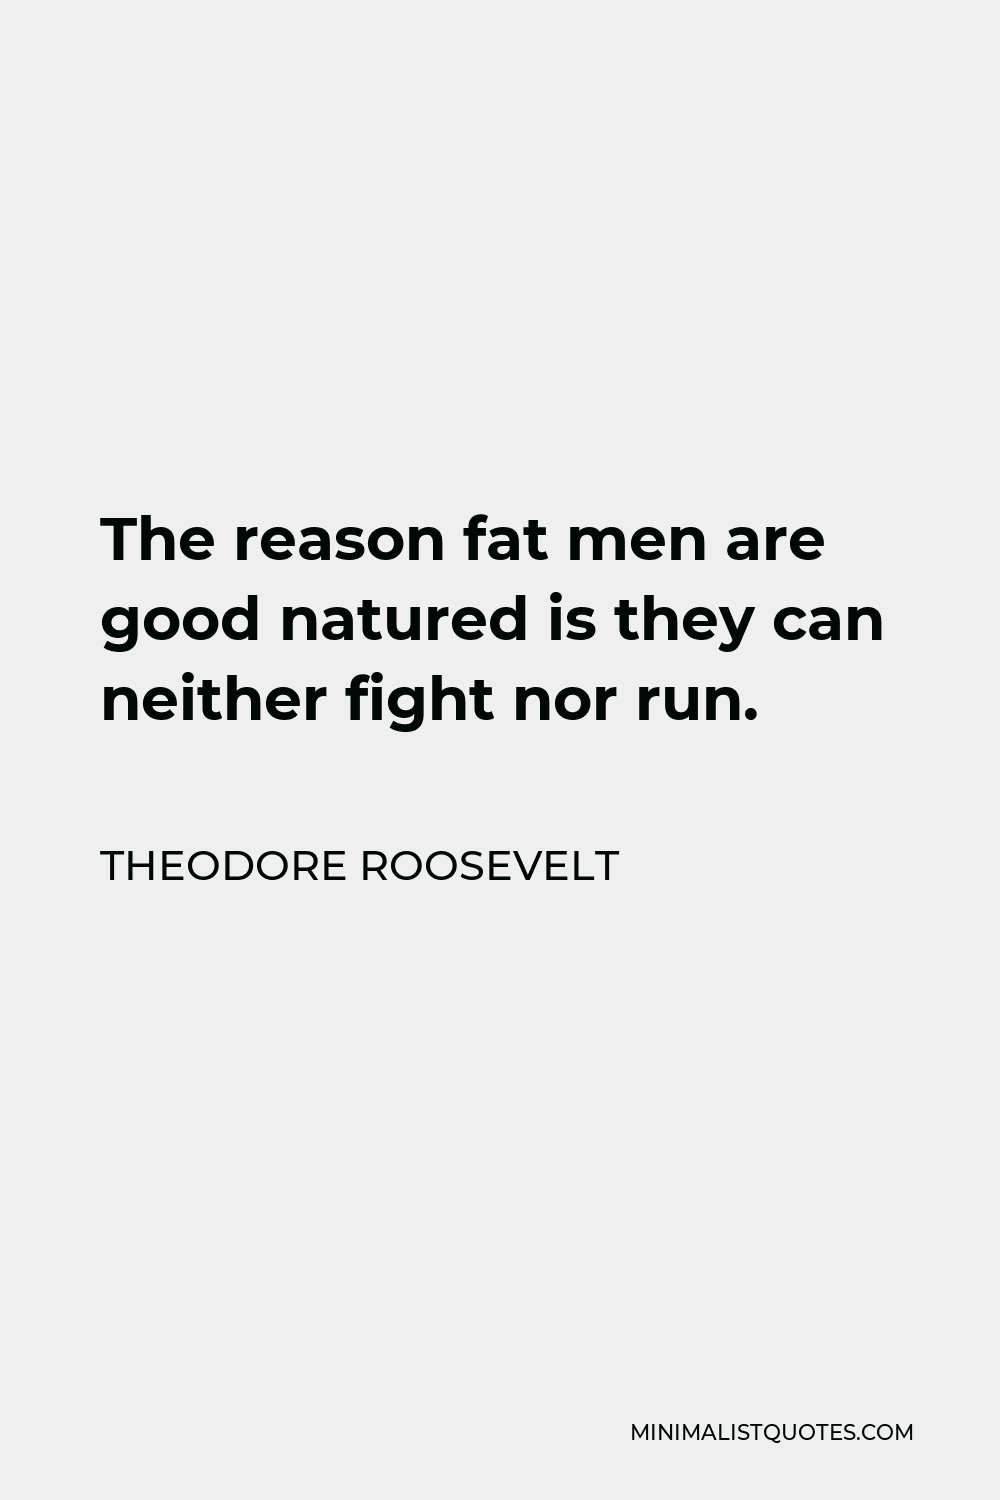 Theodore Roosevelt Quote - The reason fat men are good natured is they can neither fight nor run.